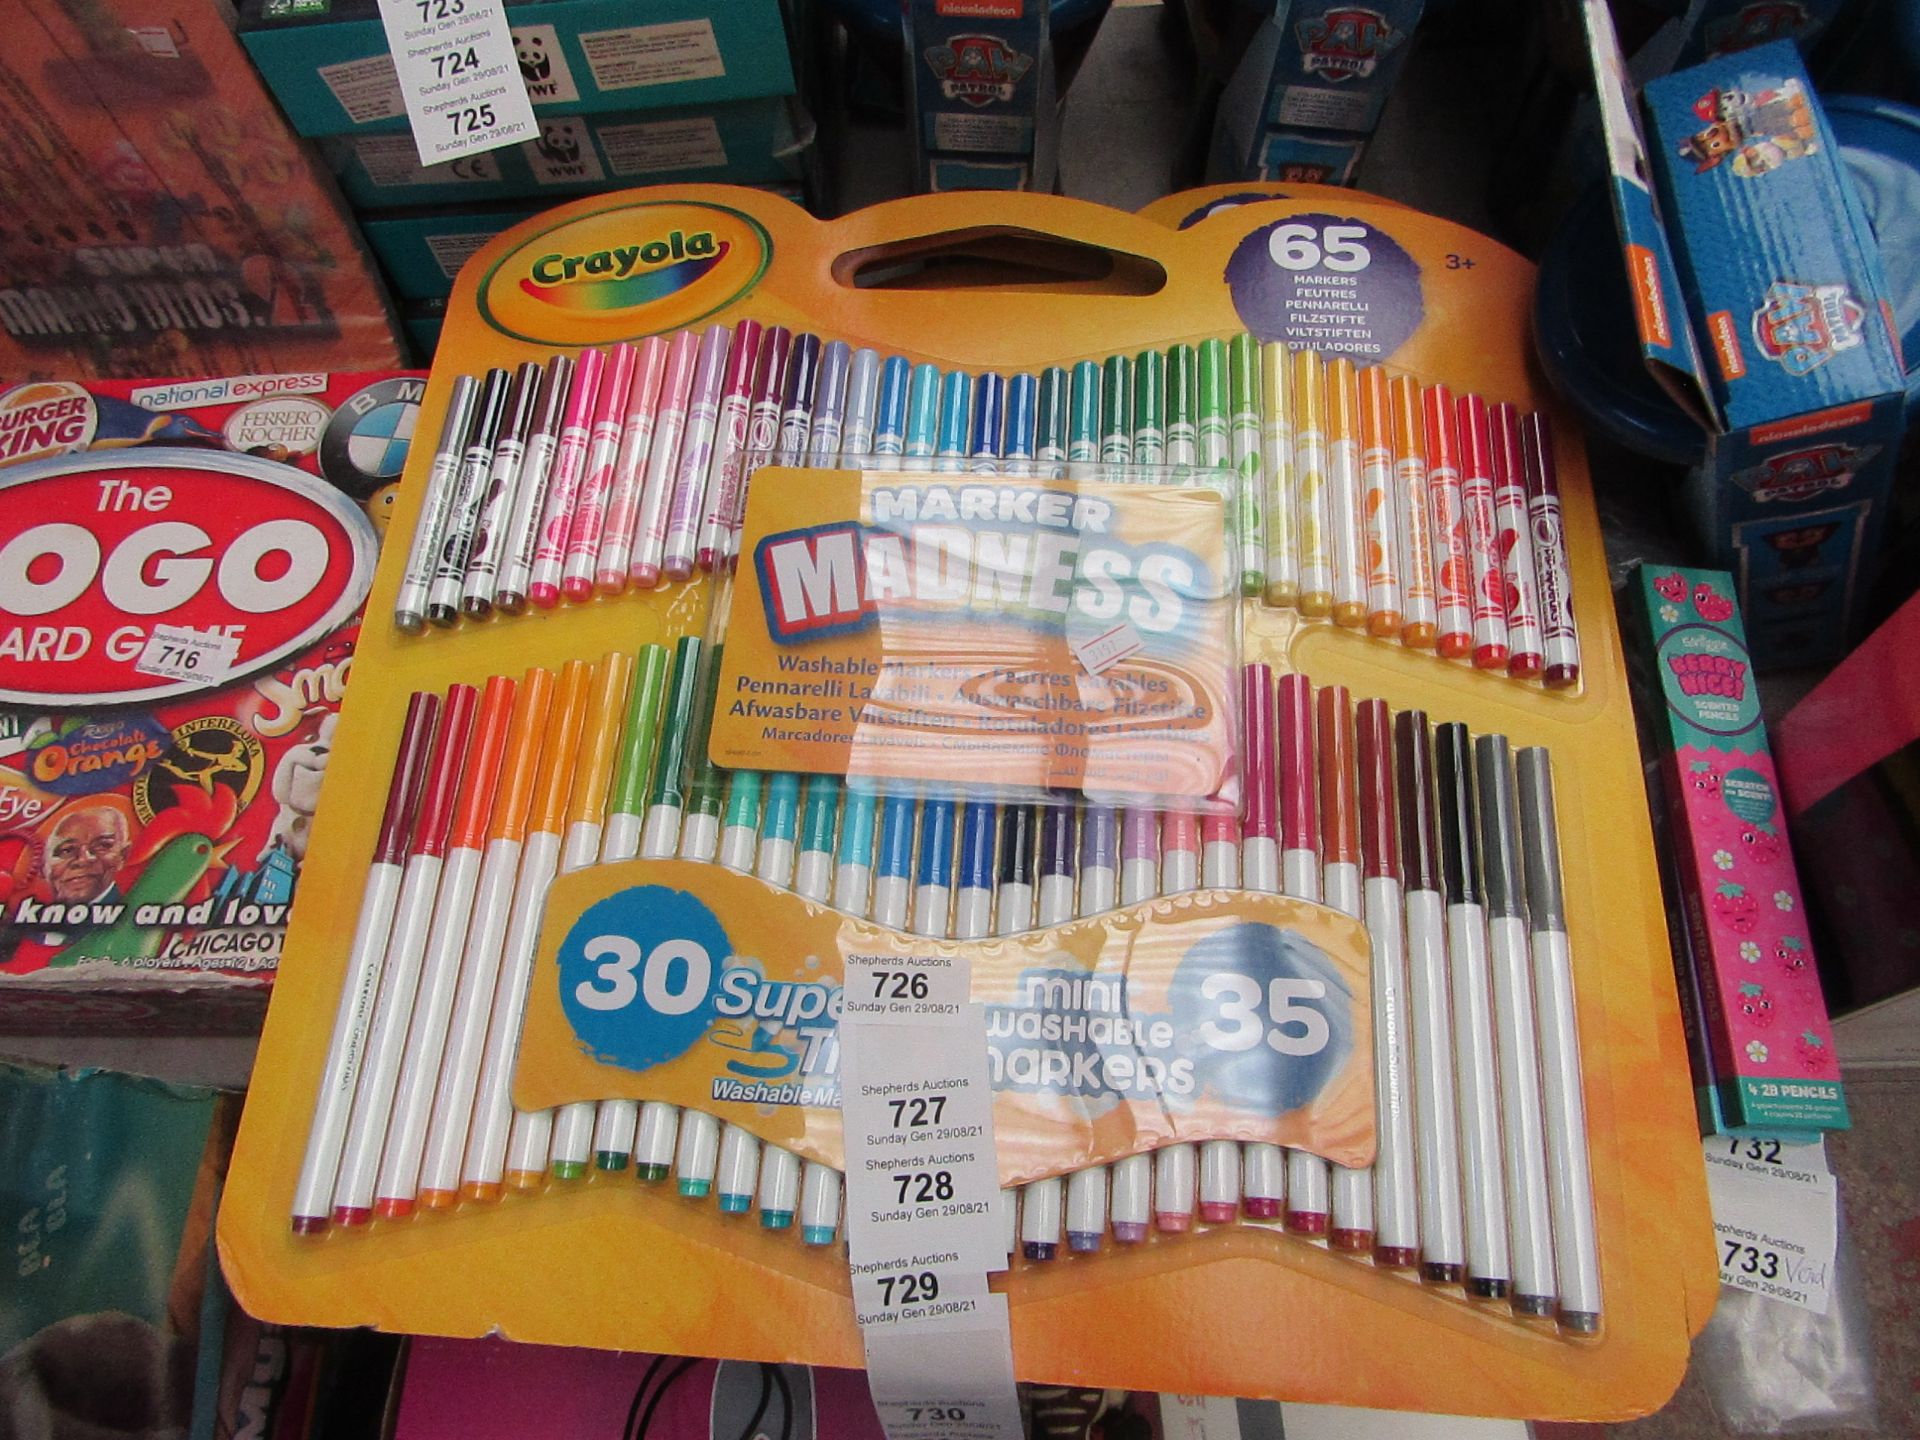 Crayola Marker Madness - Pack of 65 Washable Markers - New & Packaged.